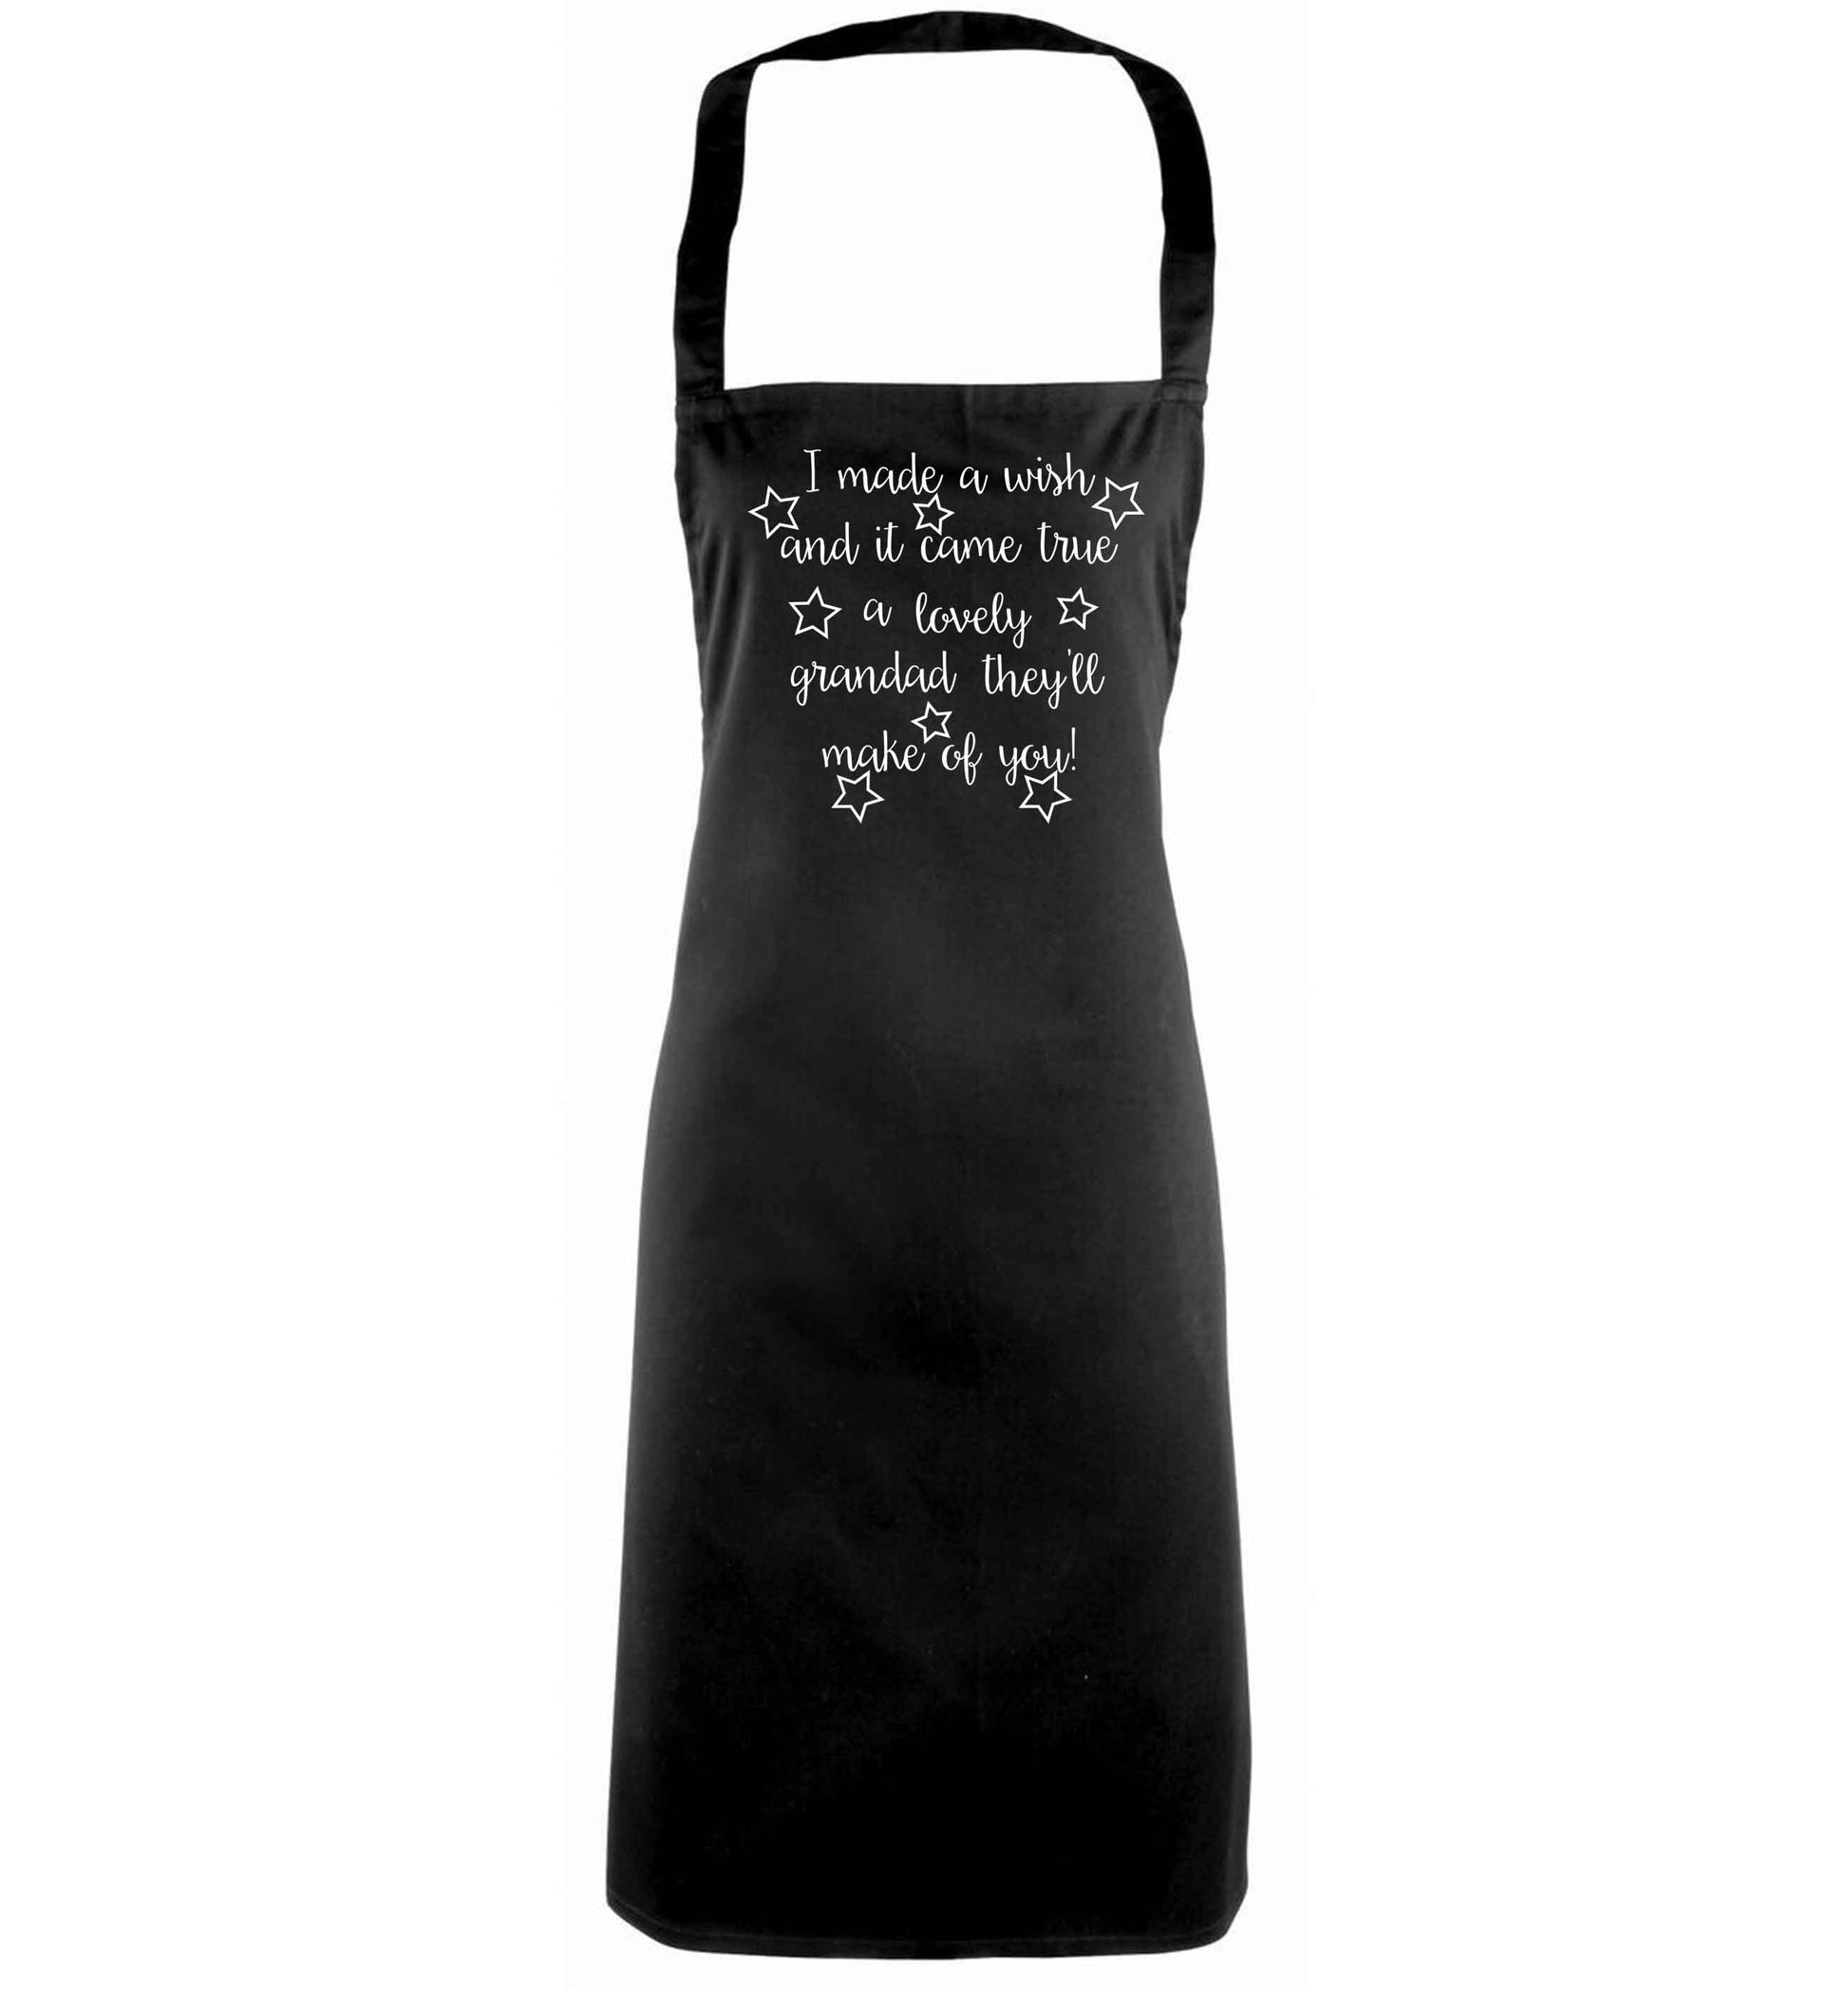 I made a wish and it came true a lovely grandad they'll make of you! black apron